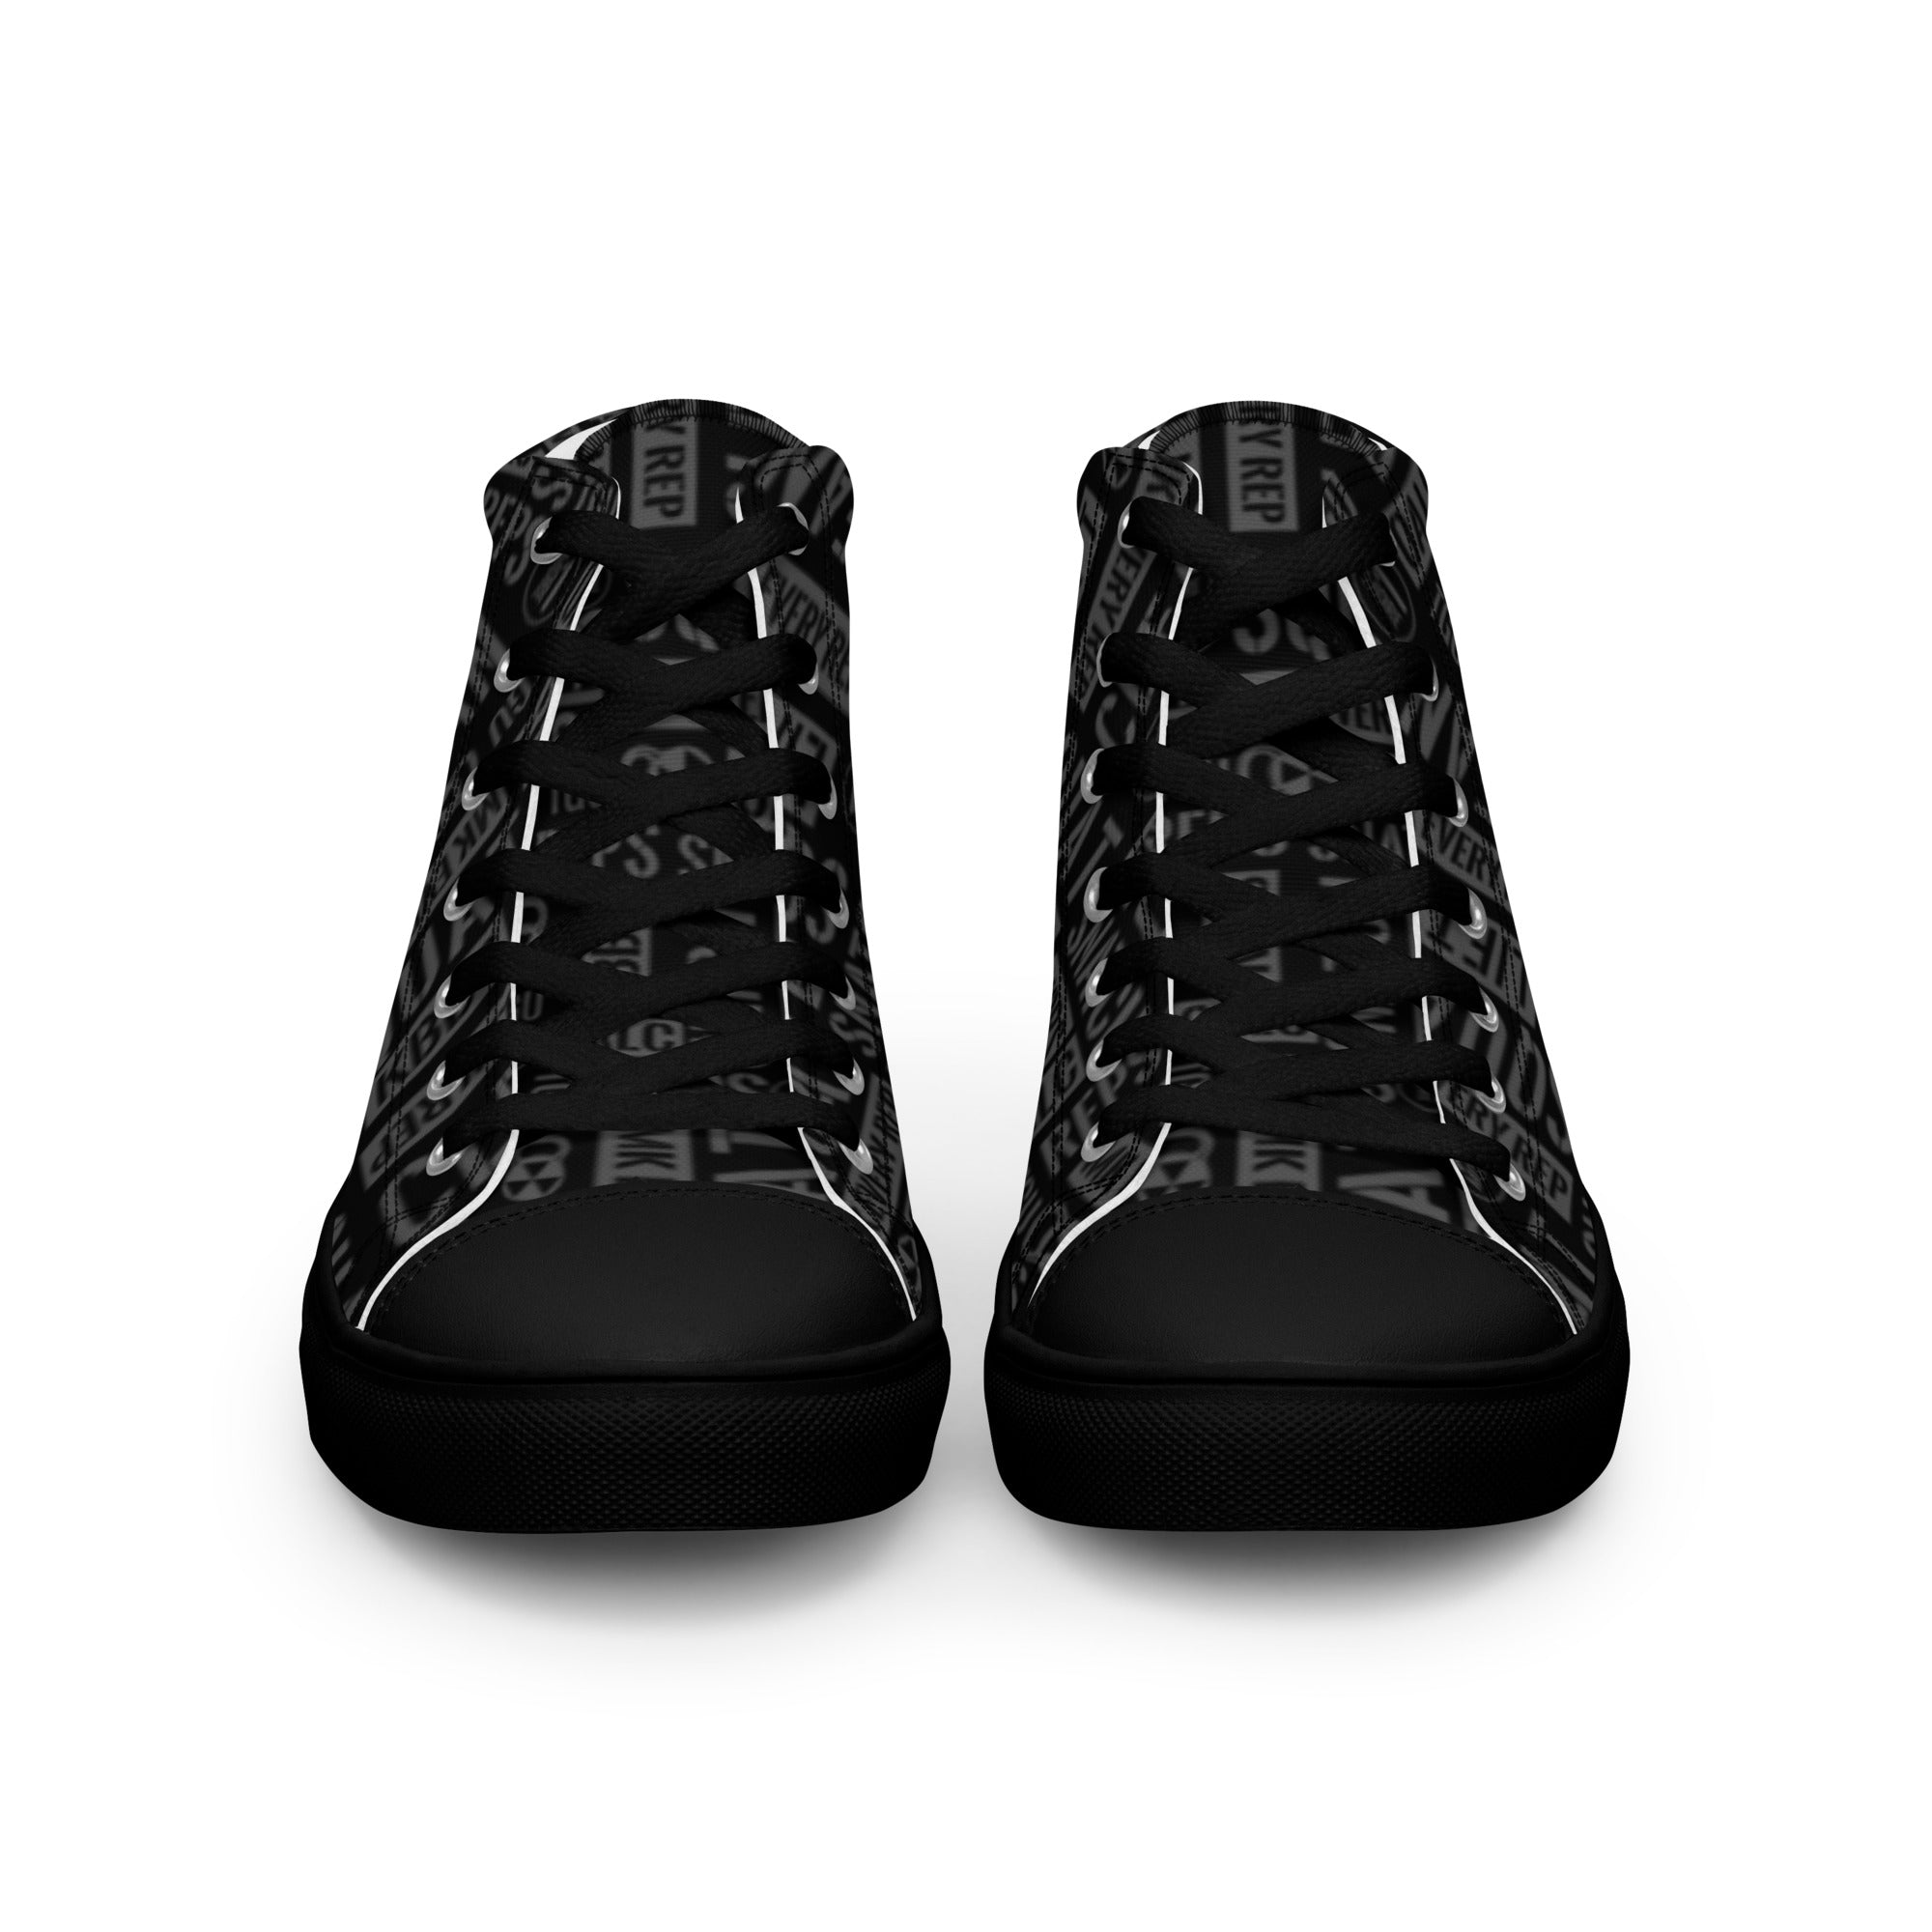 Black/Gray Acronyms Men’s High Tops Canvas Shoes